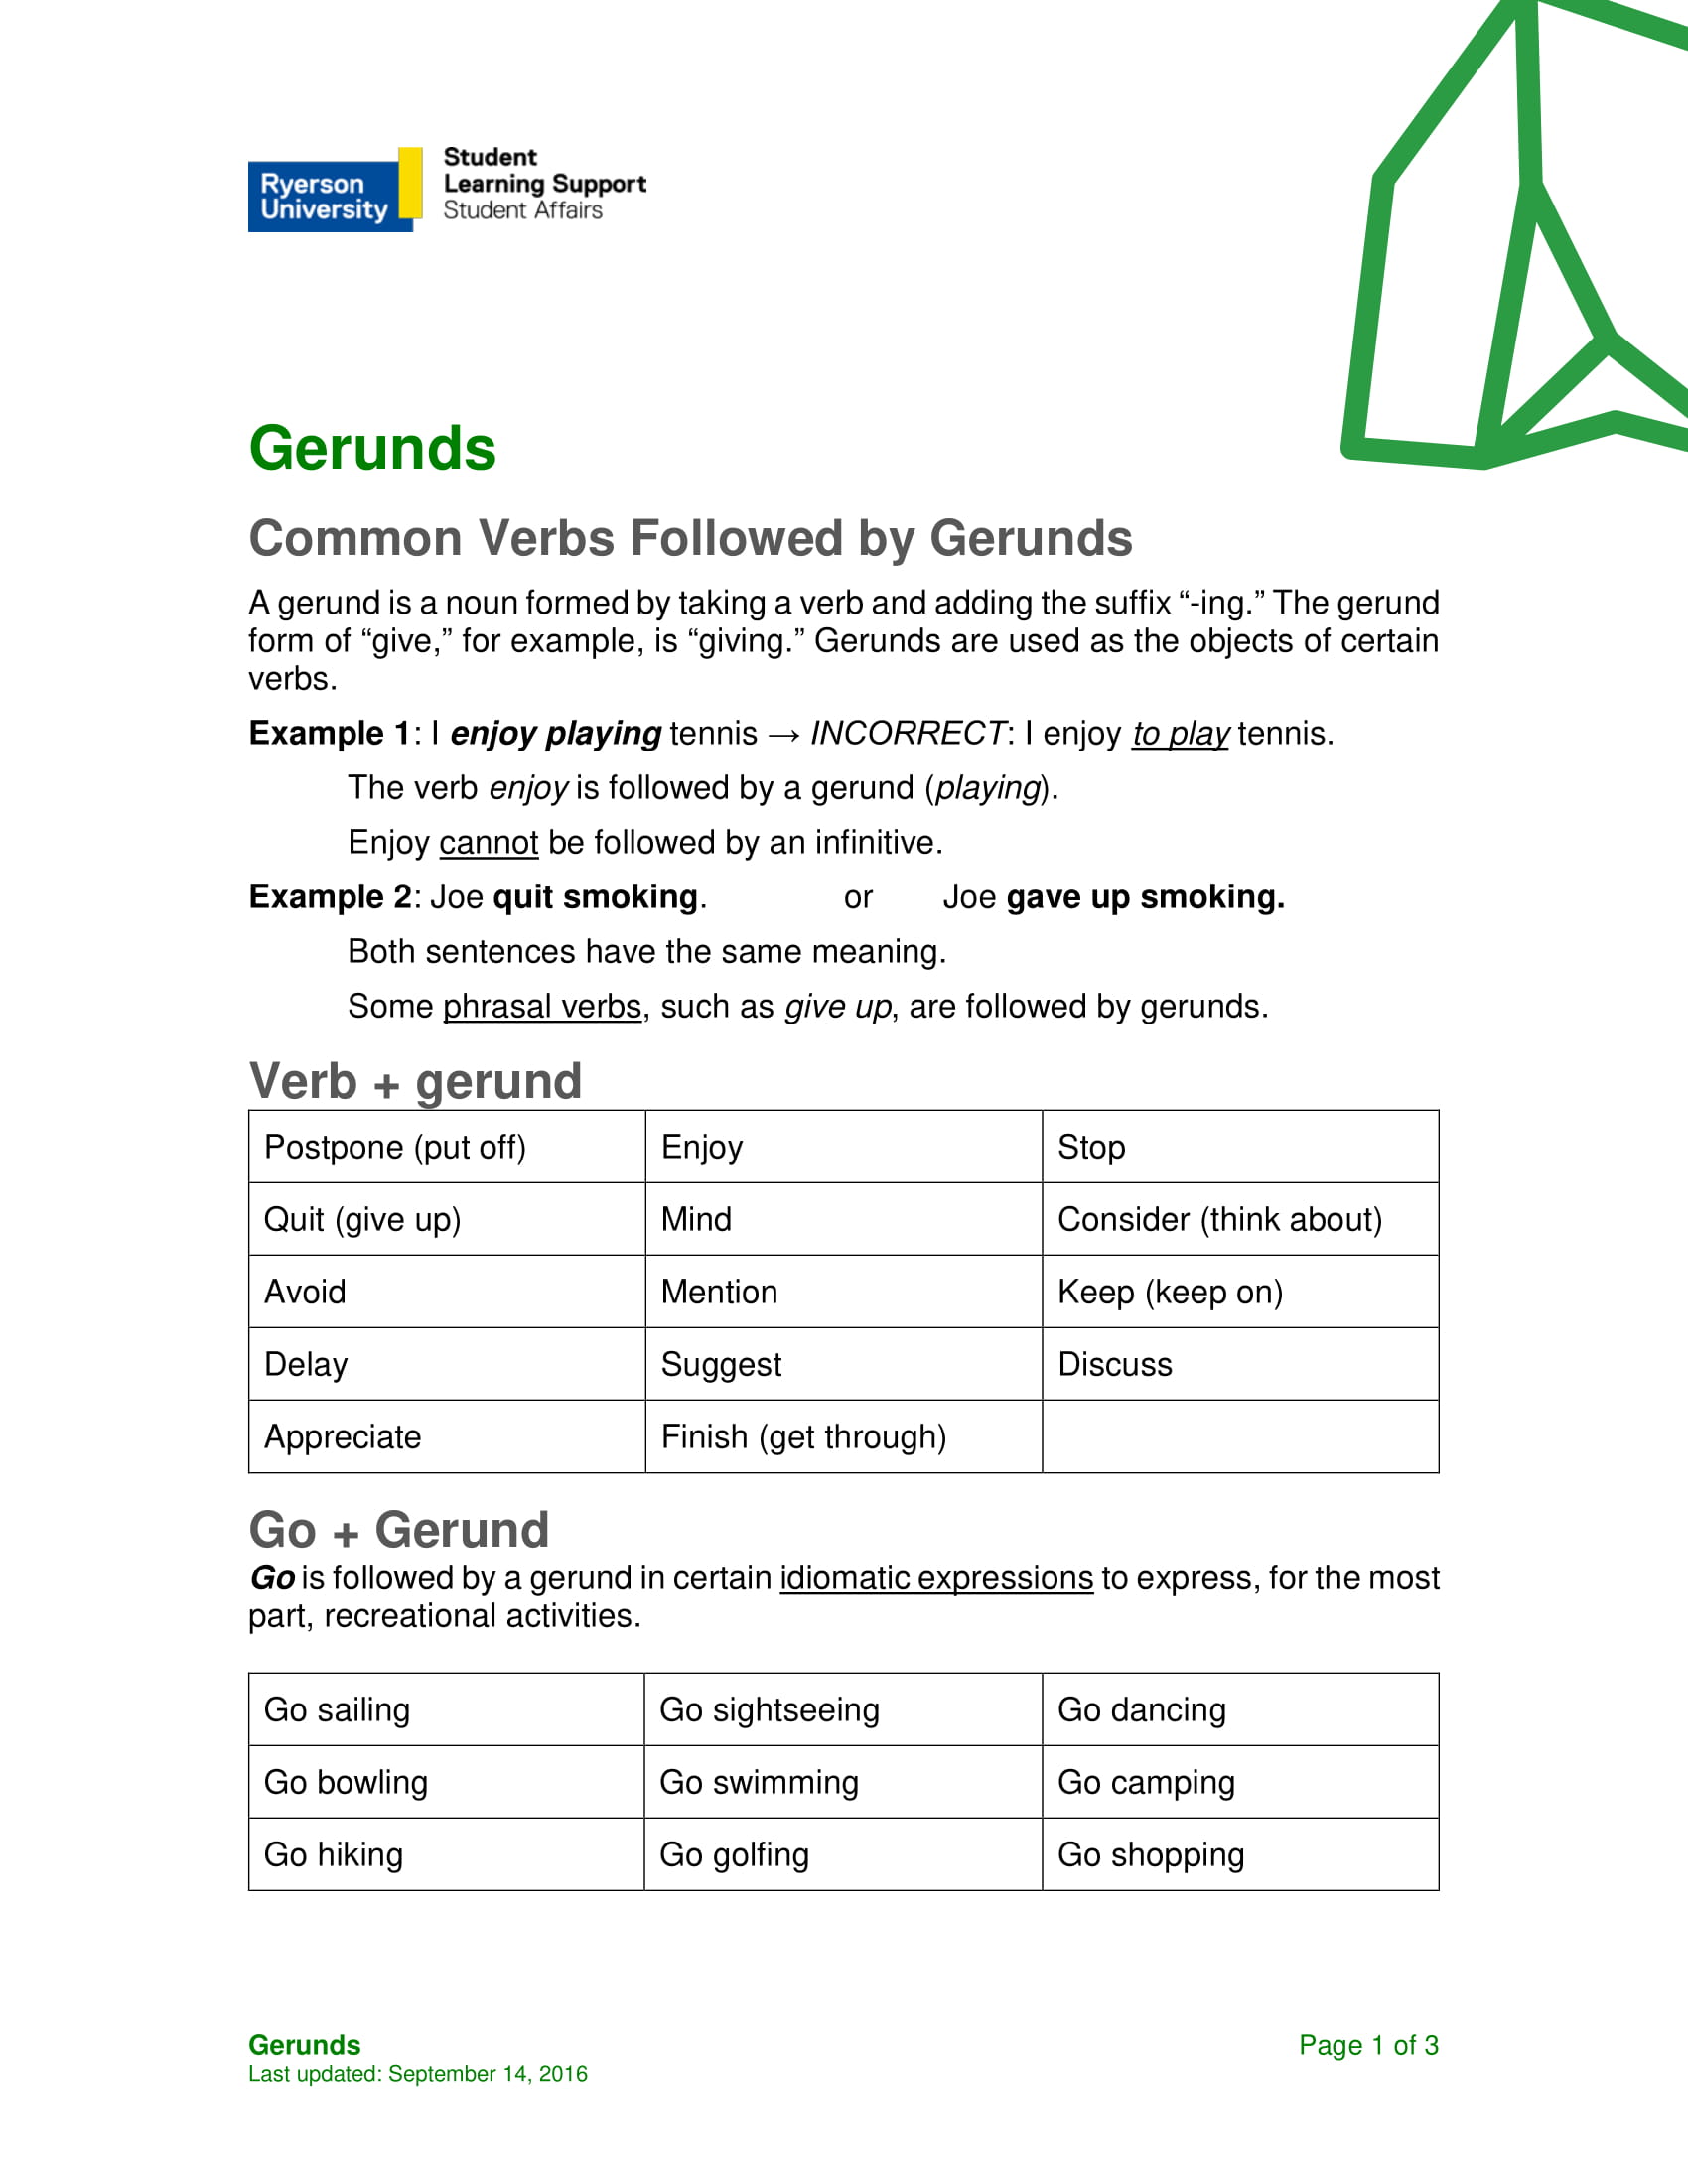 gerunds study guide example